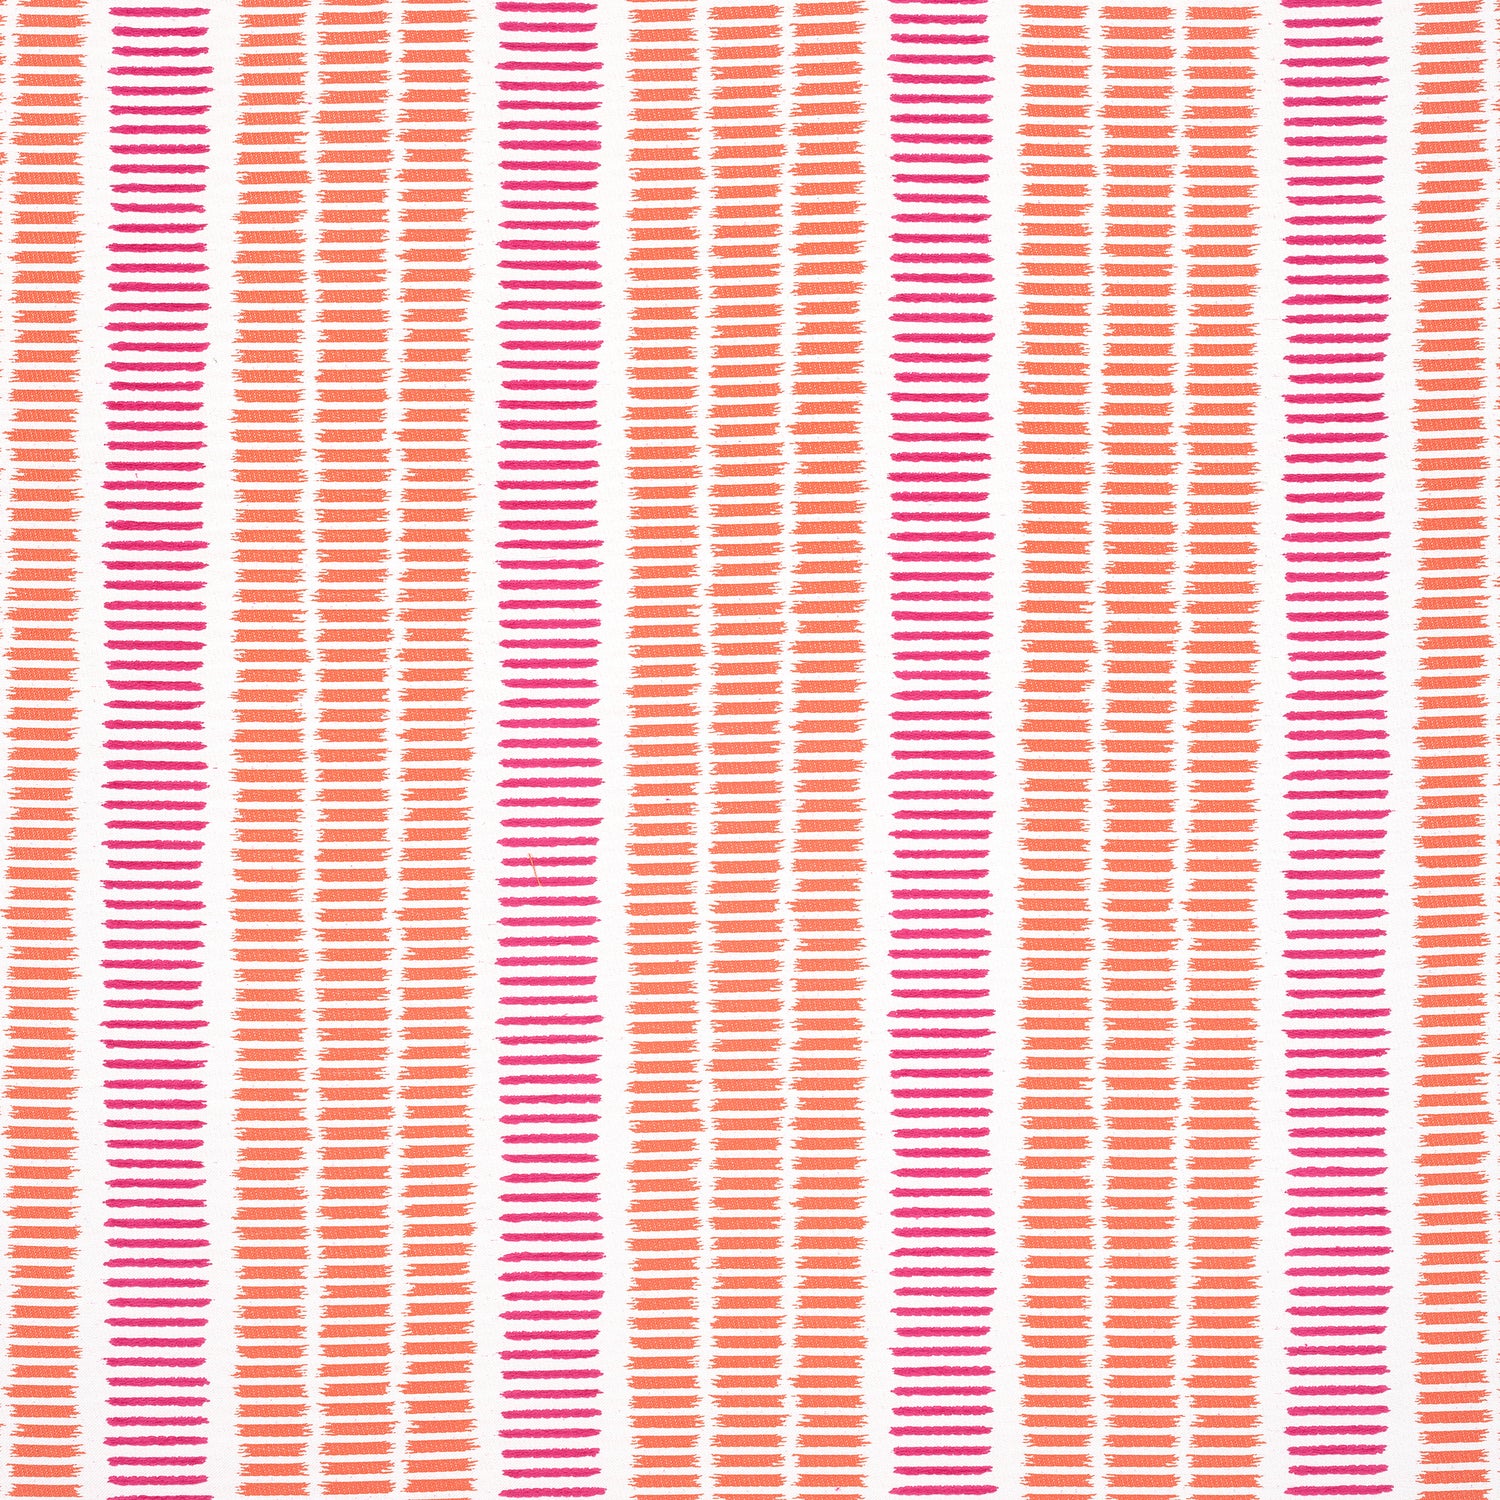 Topsail Stripe fabric in coral and peony color - pattern number W73512 - by Thibaut in the Landmark collection